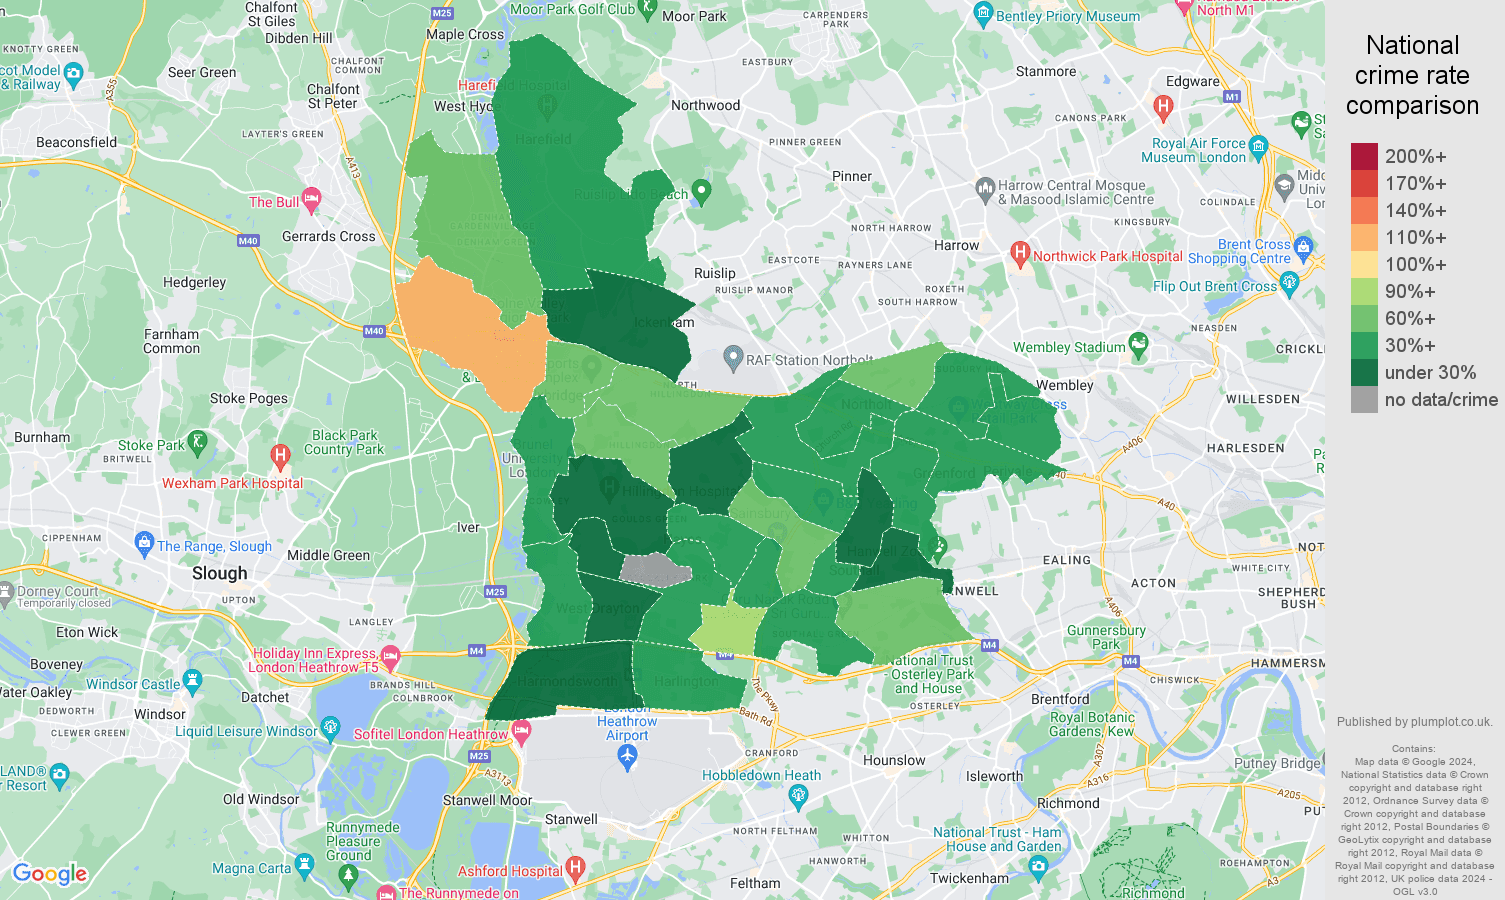 Southall possession of weapons crime rate comparison map